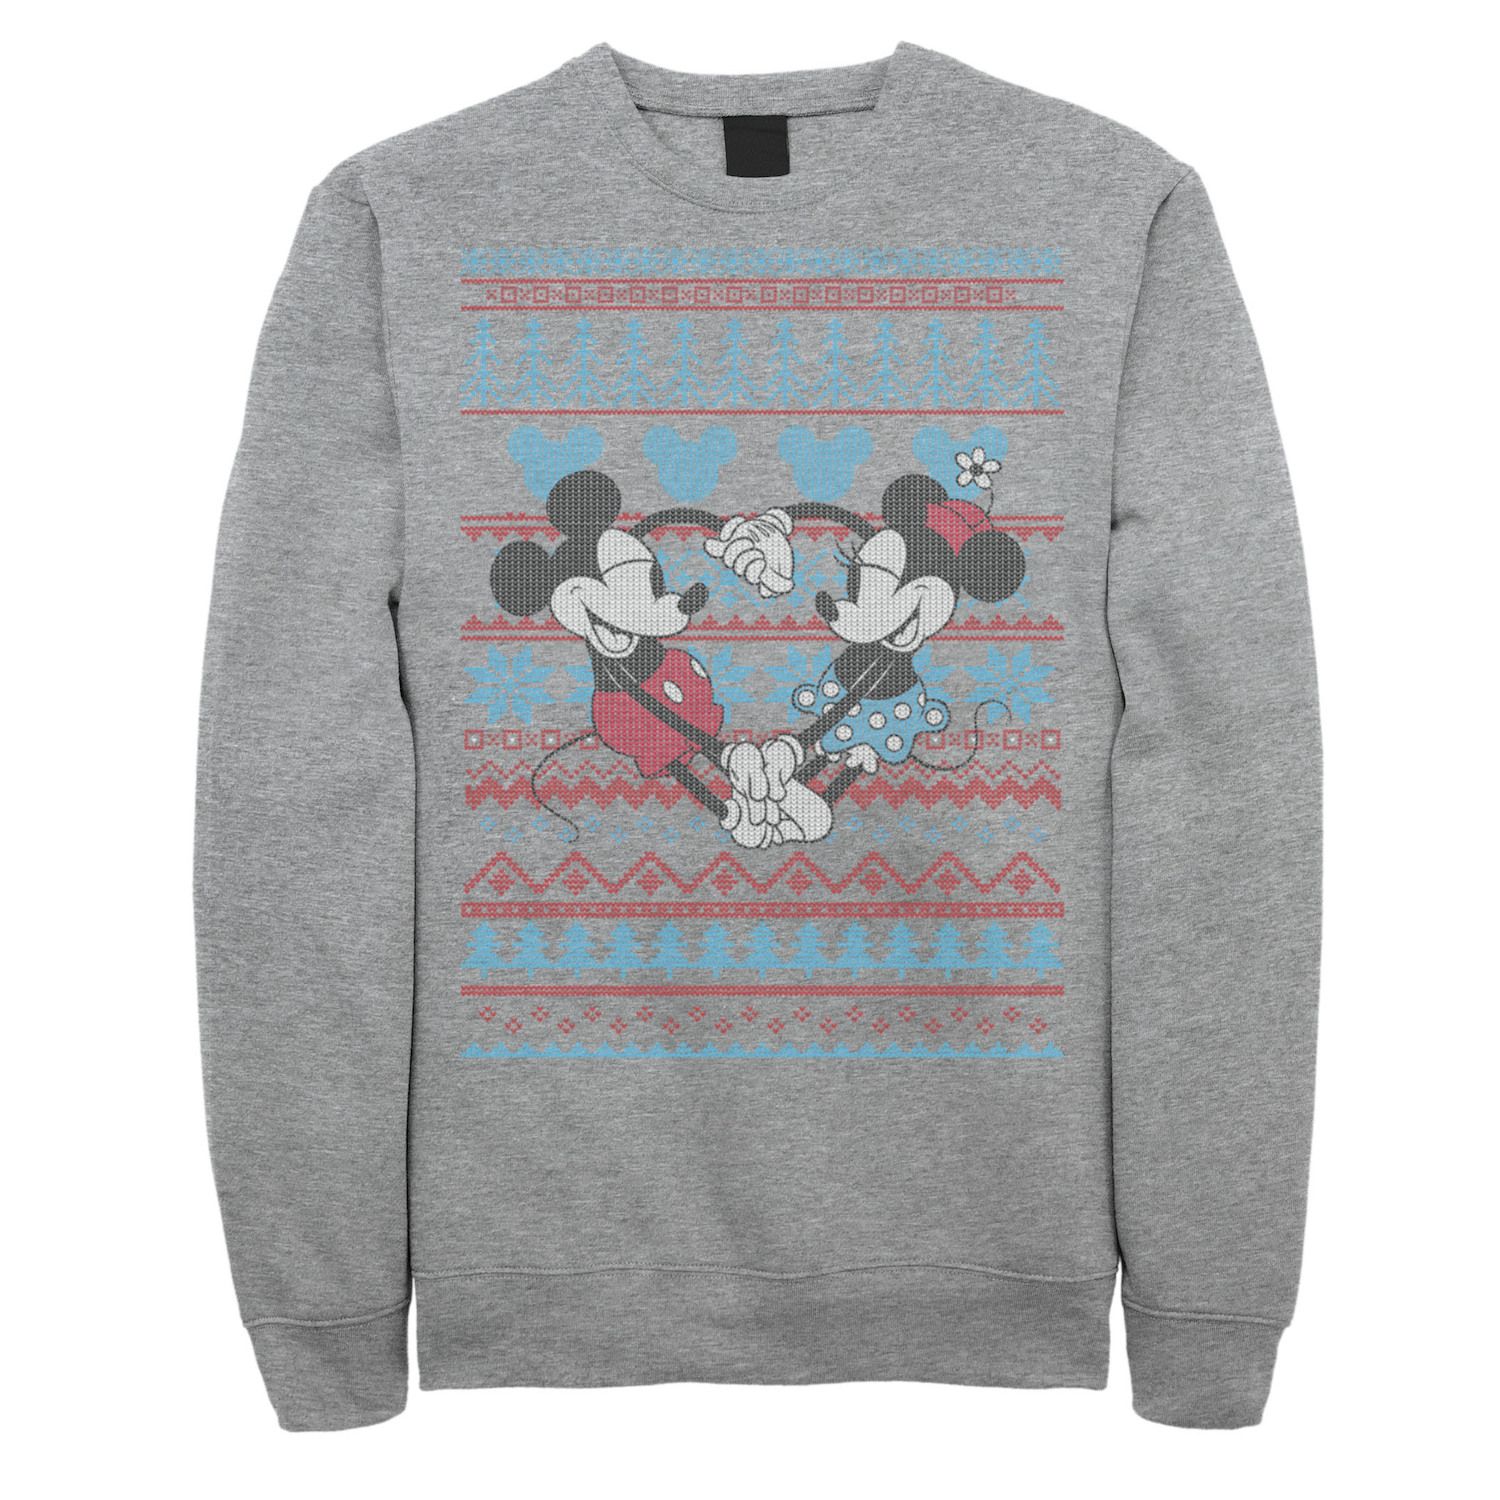 Image for Disney Men's Mickey And Minnie Mouse Christmas Sweater Style Sweatshirt at Kohl's.